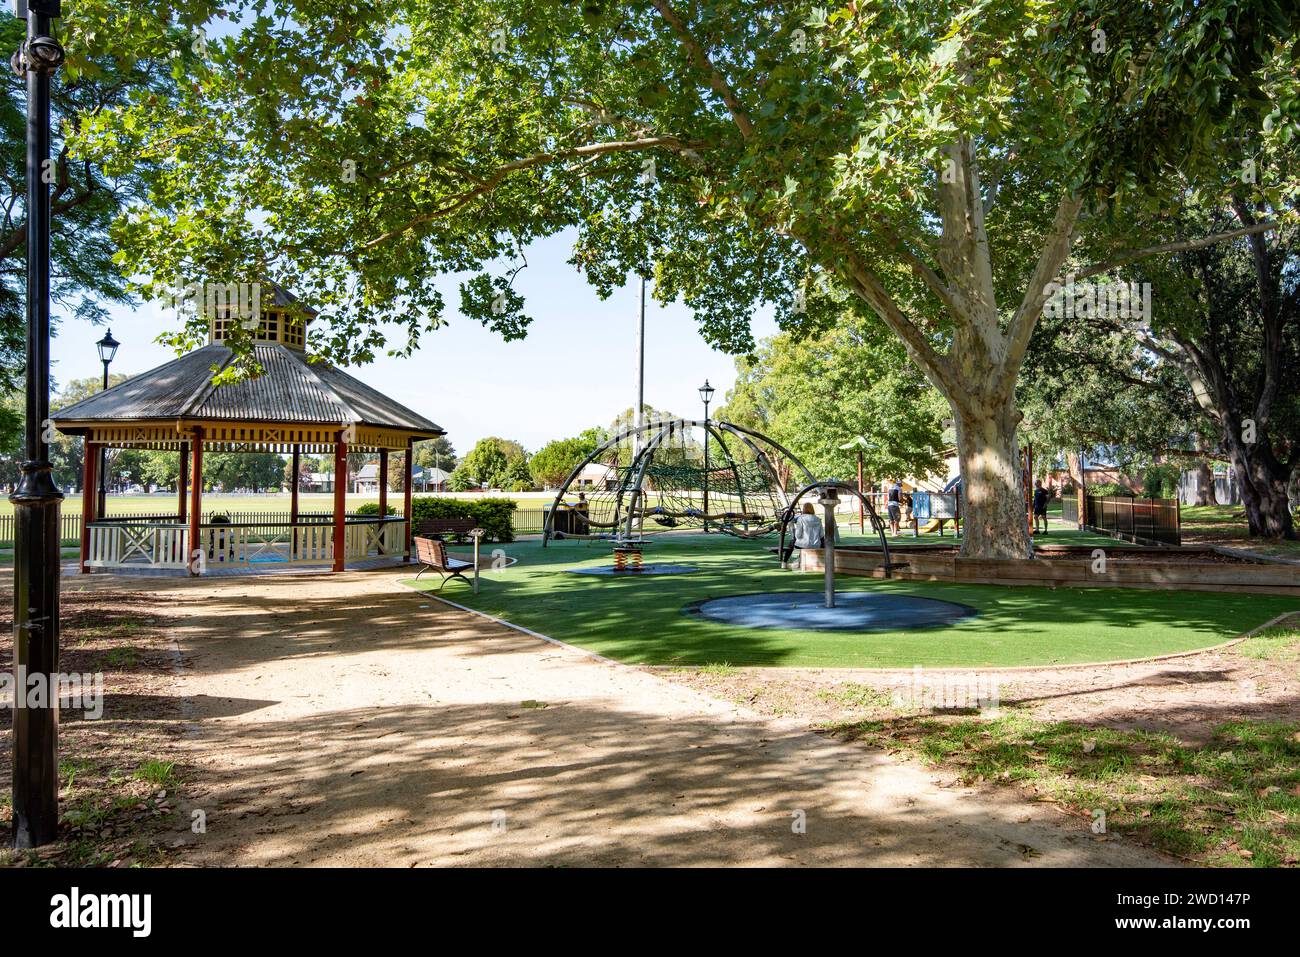 A rotunda and childrens playground are shaded by large oak trees bounding a cricket oval in the outer Sydney suburb of Richmond, NSW, Australia Stock Photo